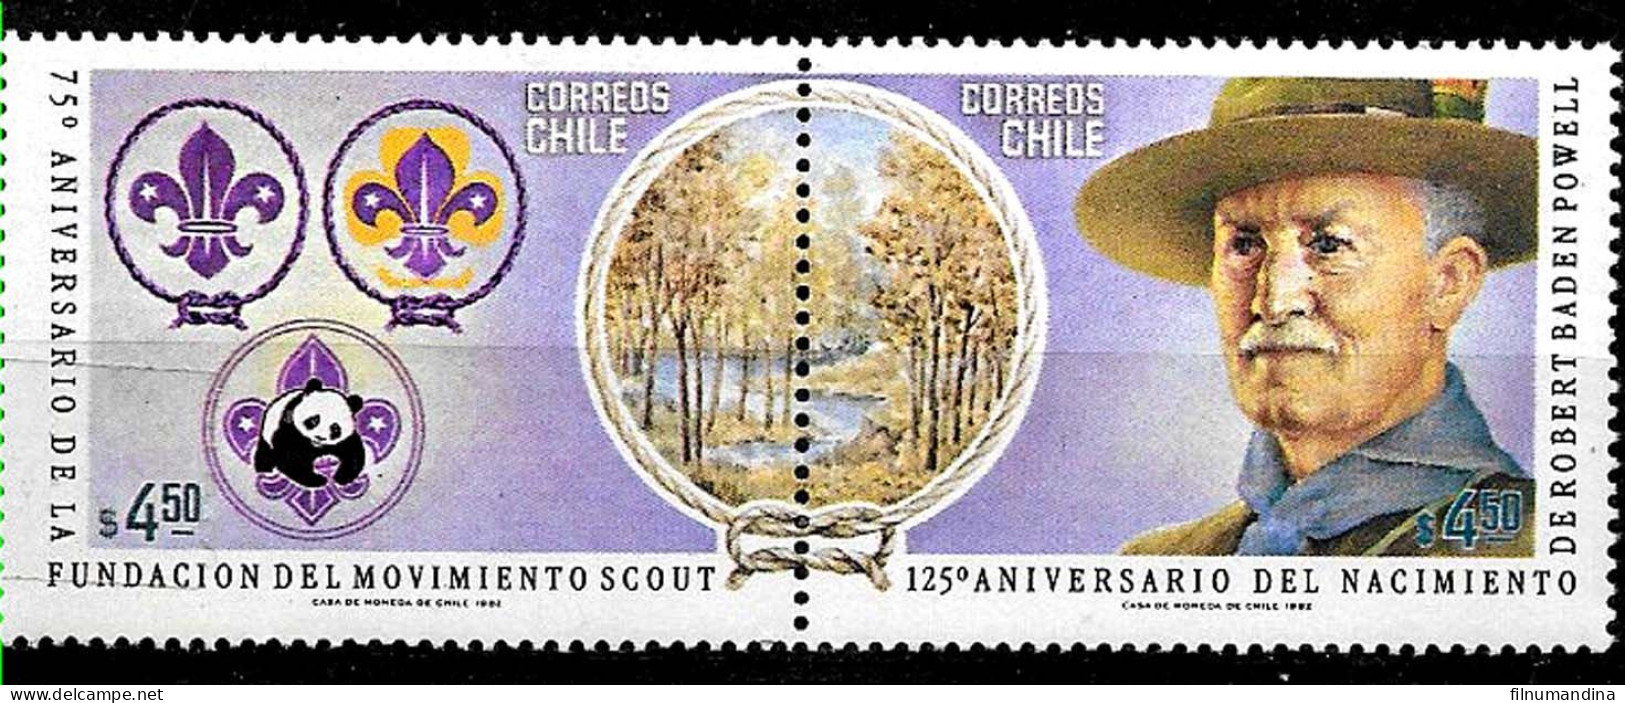 #2595 CHILE 1982 SCOUTS SCOUTISM BADEN POWELL YV 597-8 MNH - Chili